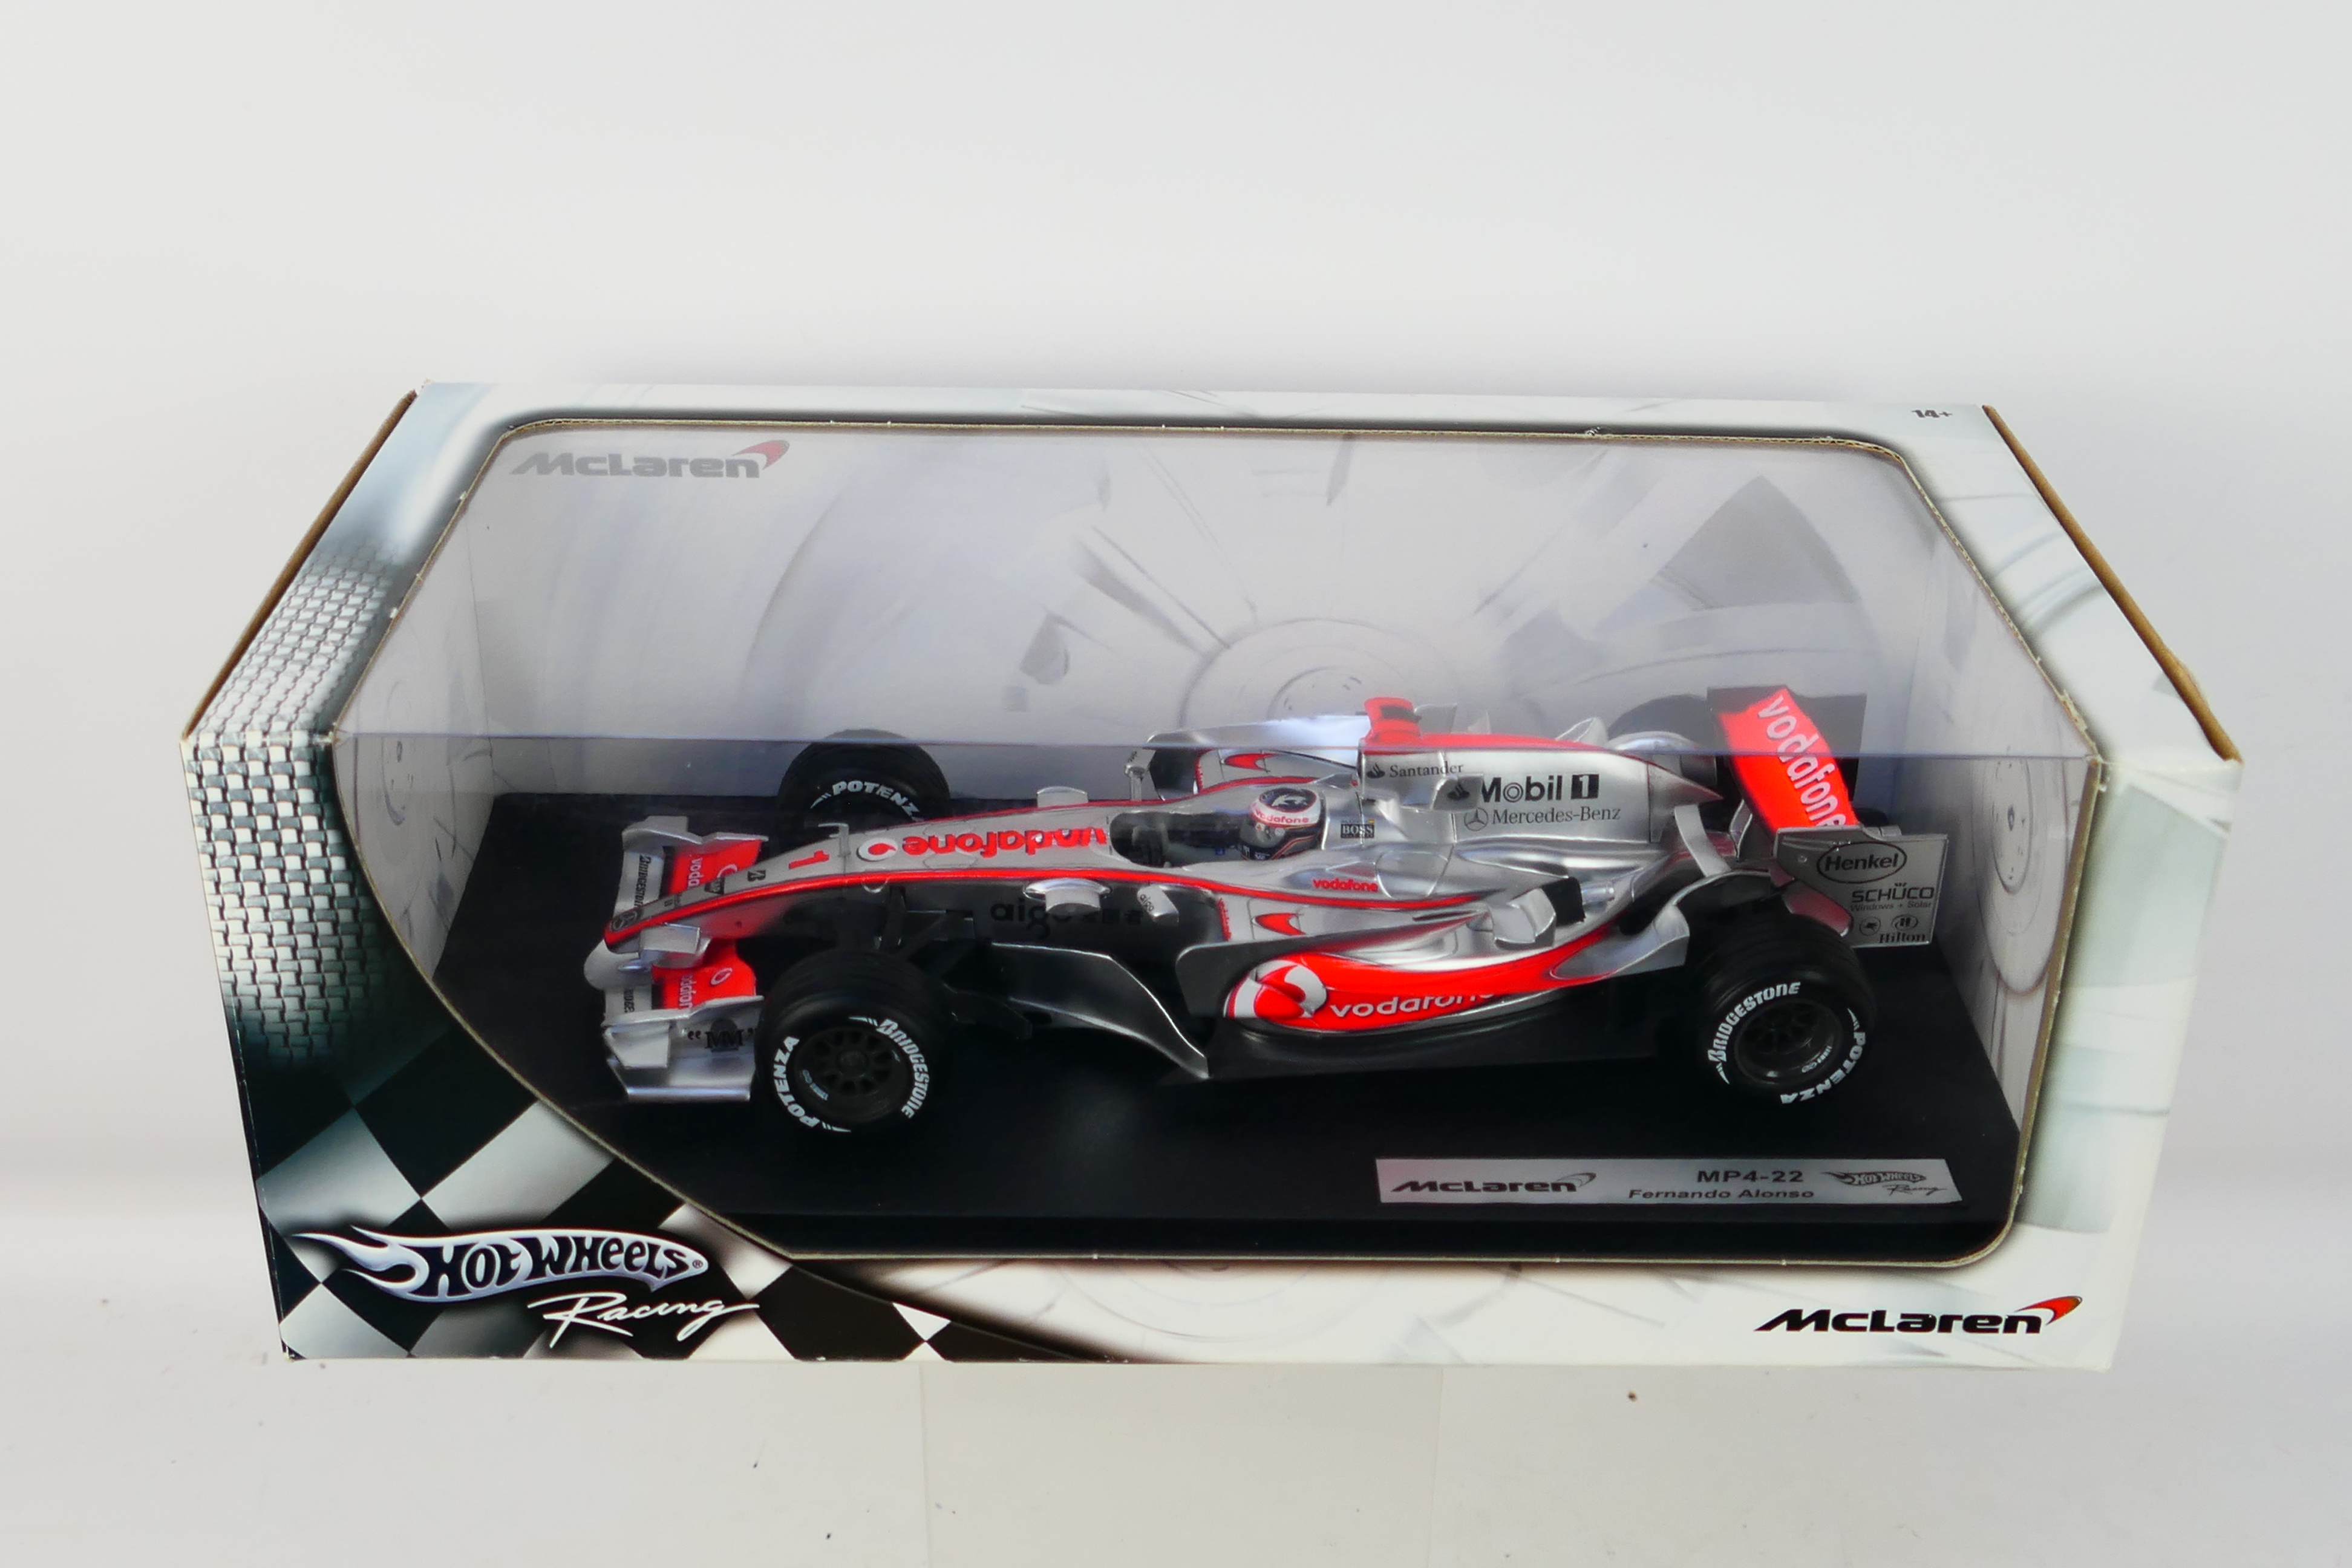 Hot Wheels - A boxed 1:18 scale McLaren MP4-22 Fernando Alonso car which is still factory sealed so - Image 3 of 3